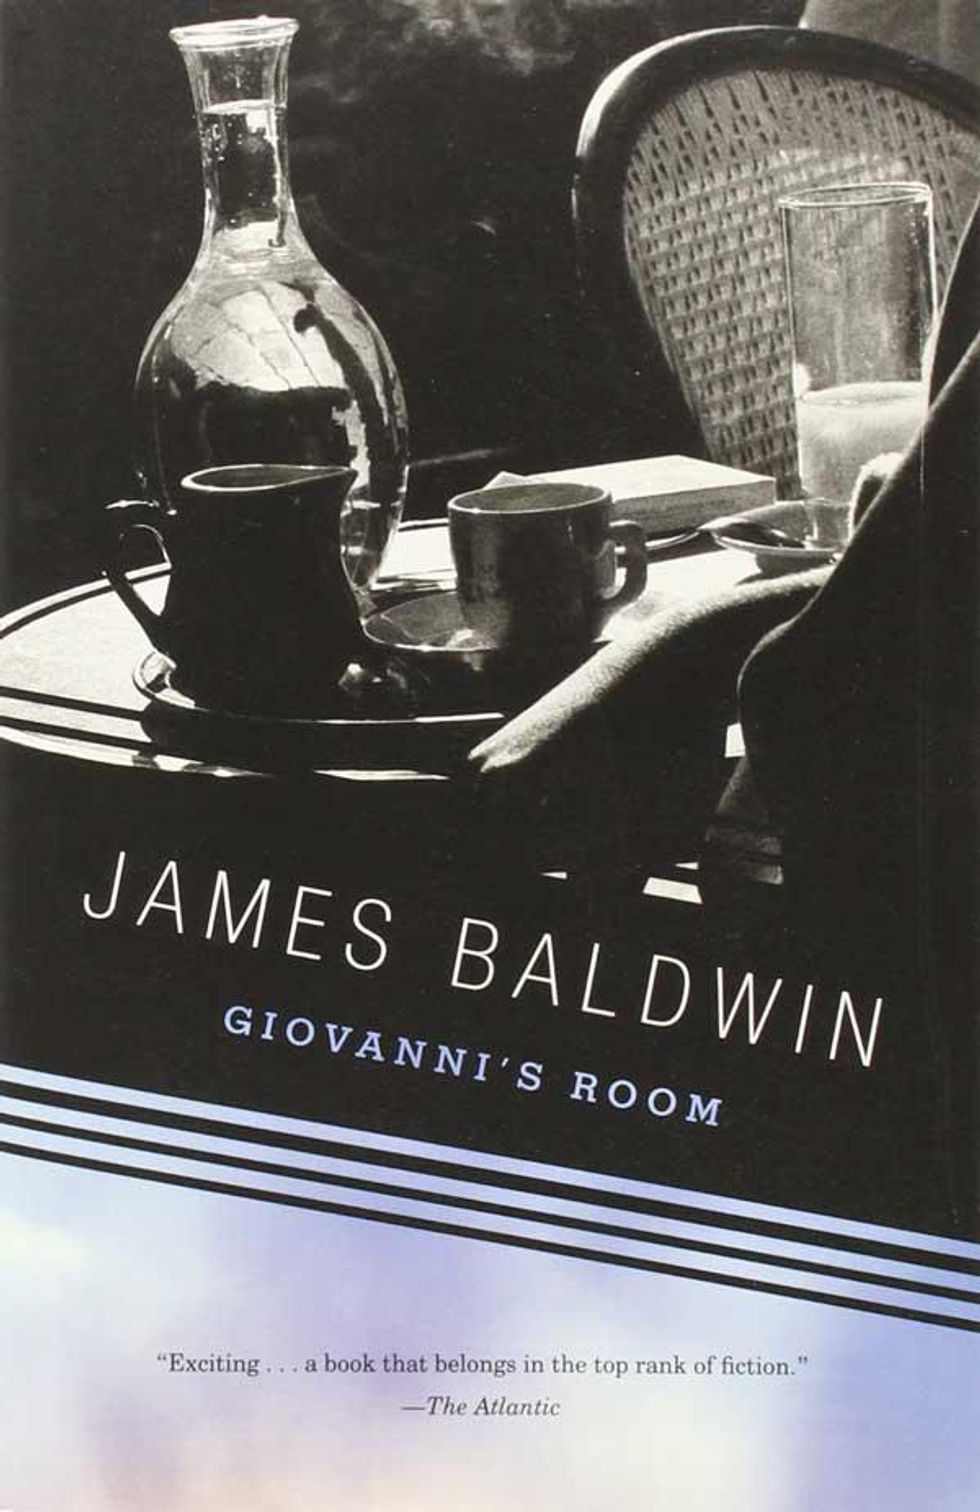 This is the cover of the book Giovanni's Room.